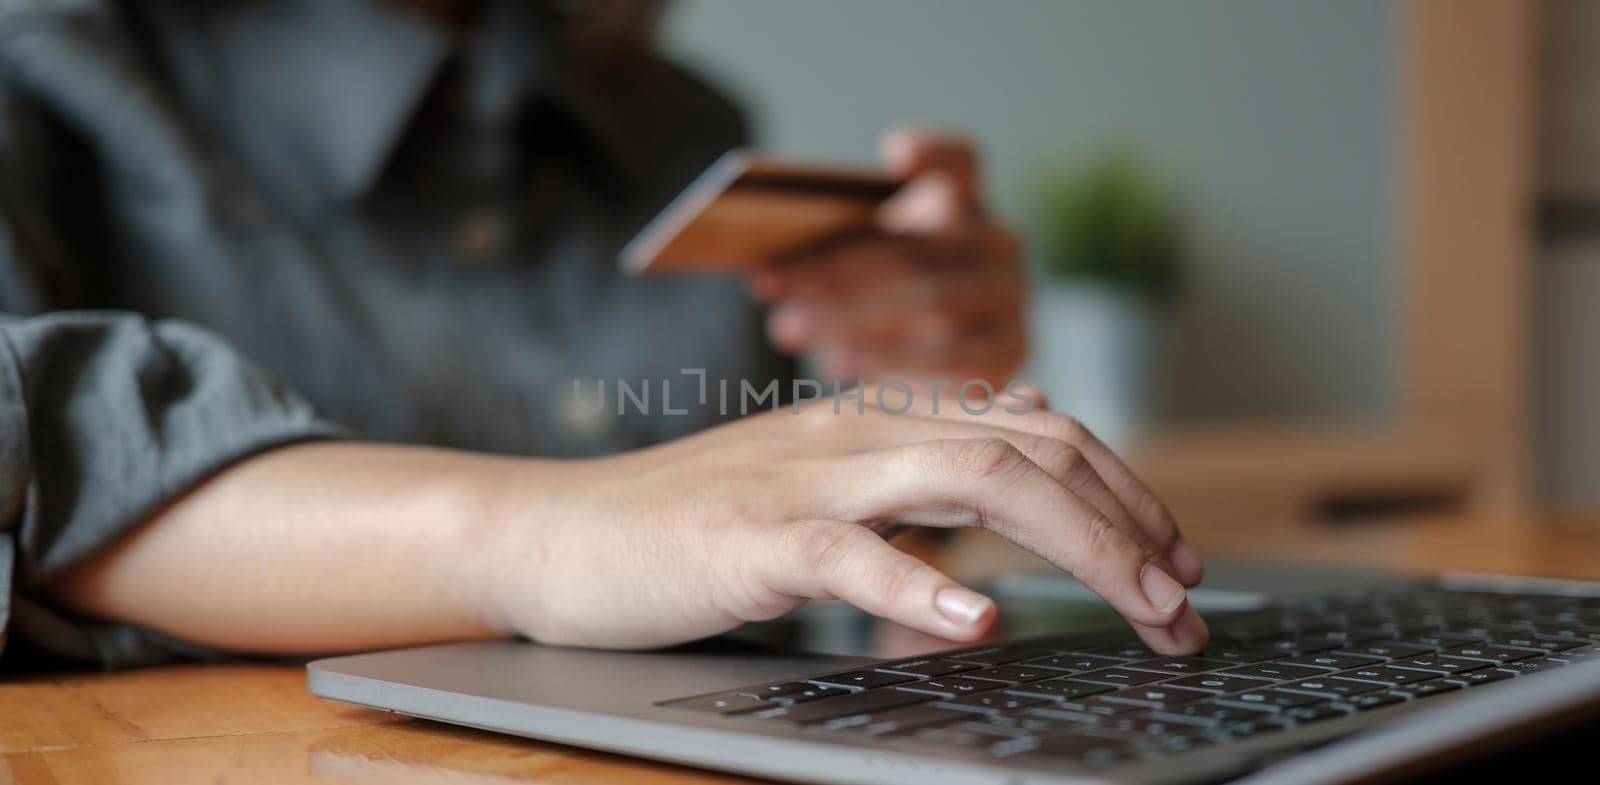 woman hand holding credit card with using laptop for online shopping while making orders at home. business, lifestyle, technology, ecommerce, digital banking and online payment concept..